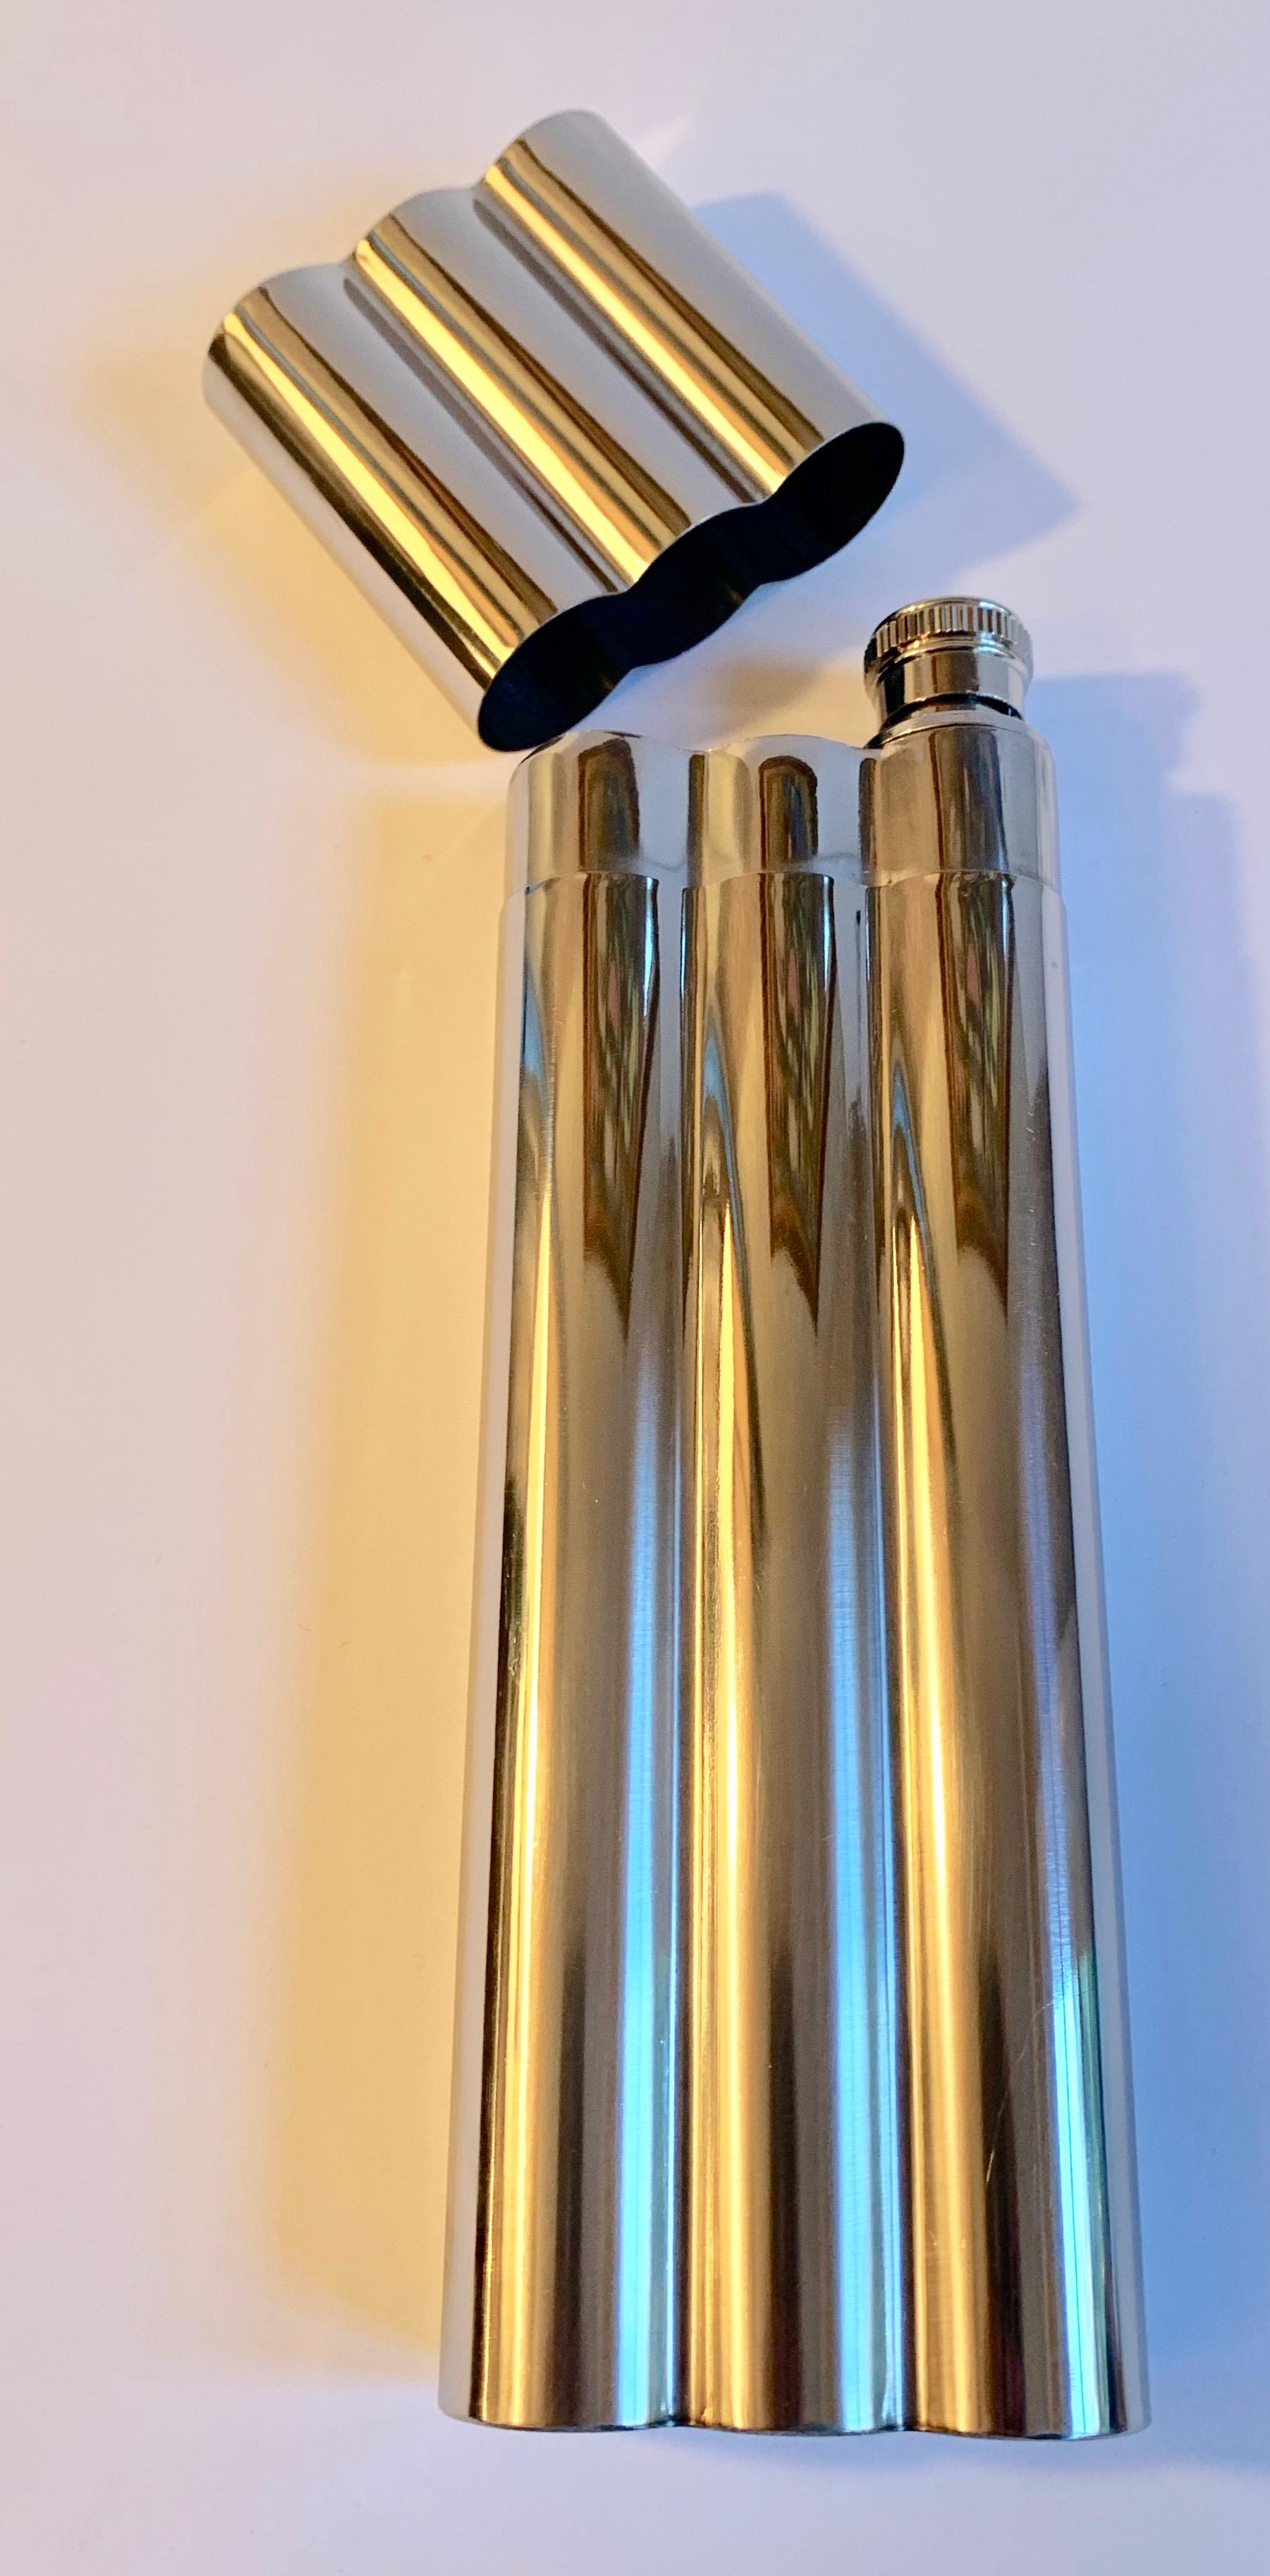 Polished chrome cigar holder with flask, this clever cigar holder will hold two cigars and your stash of favorite spirits, a great gift. Cigars, liquor, wine, 420.